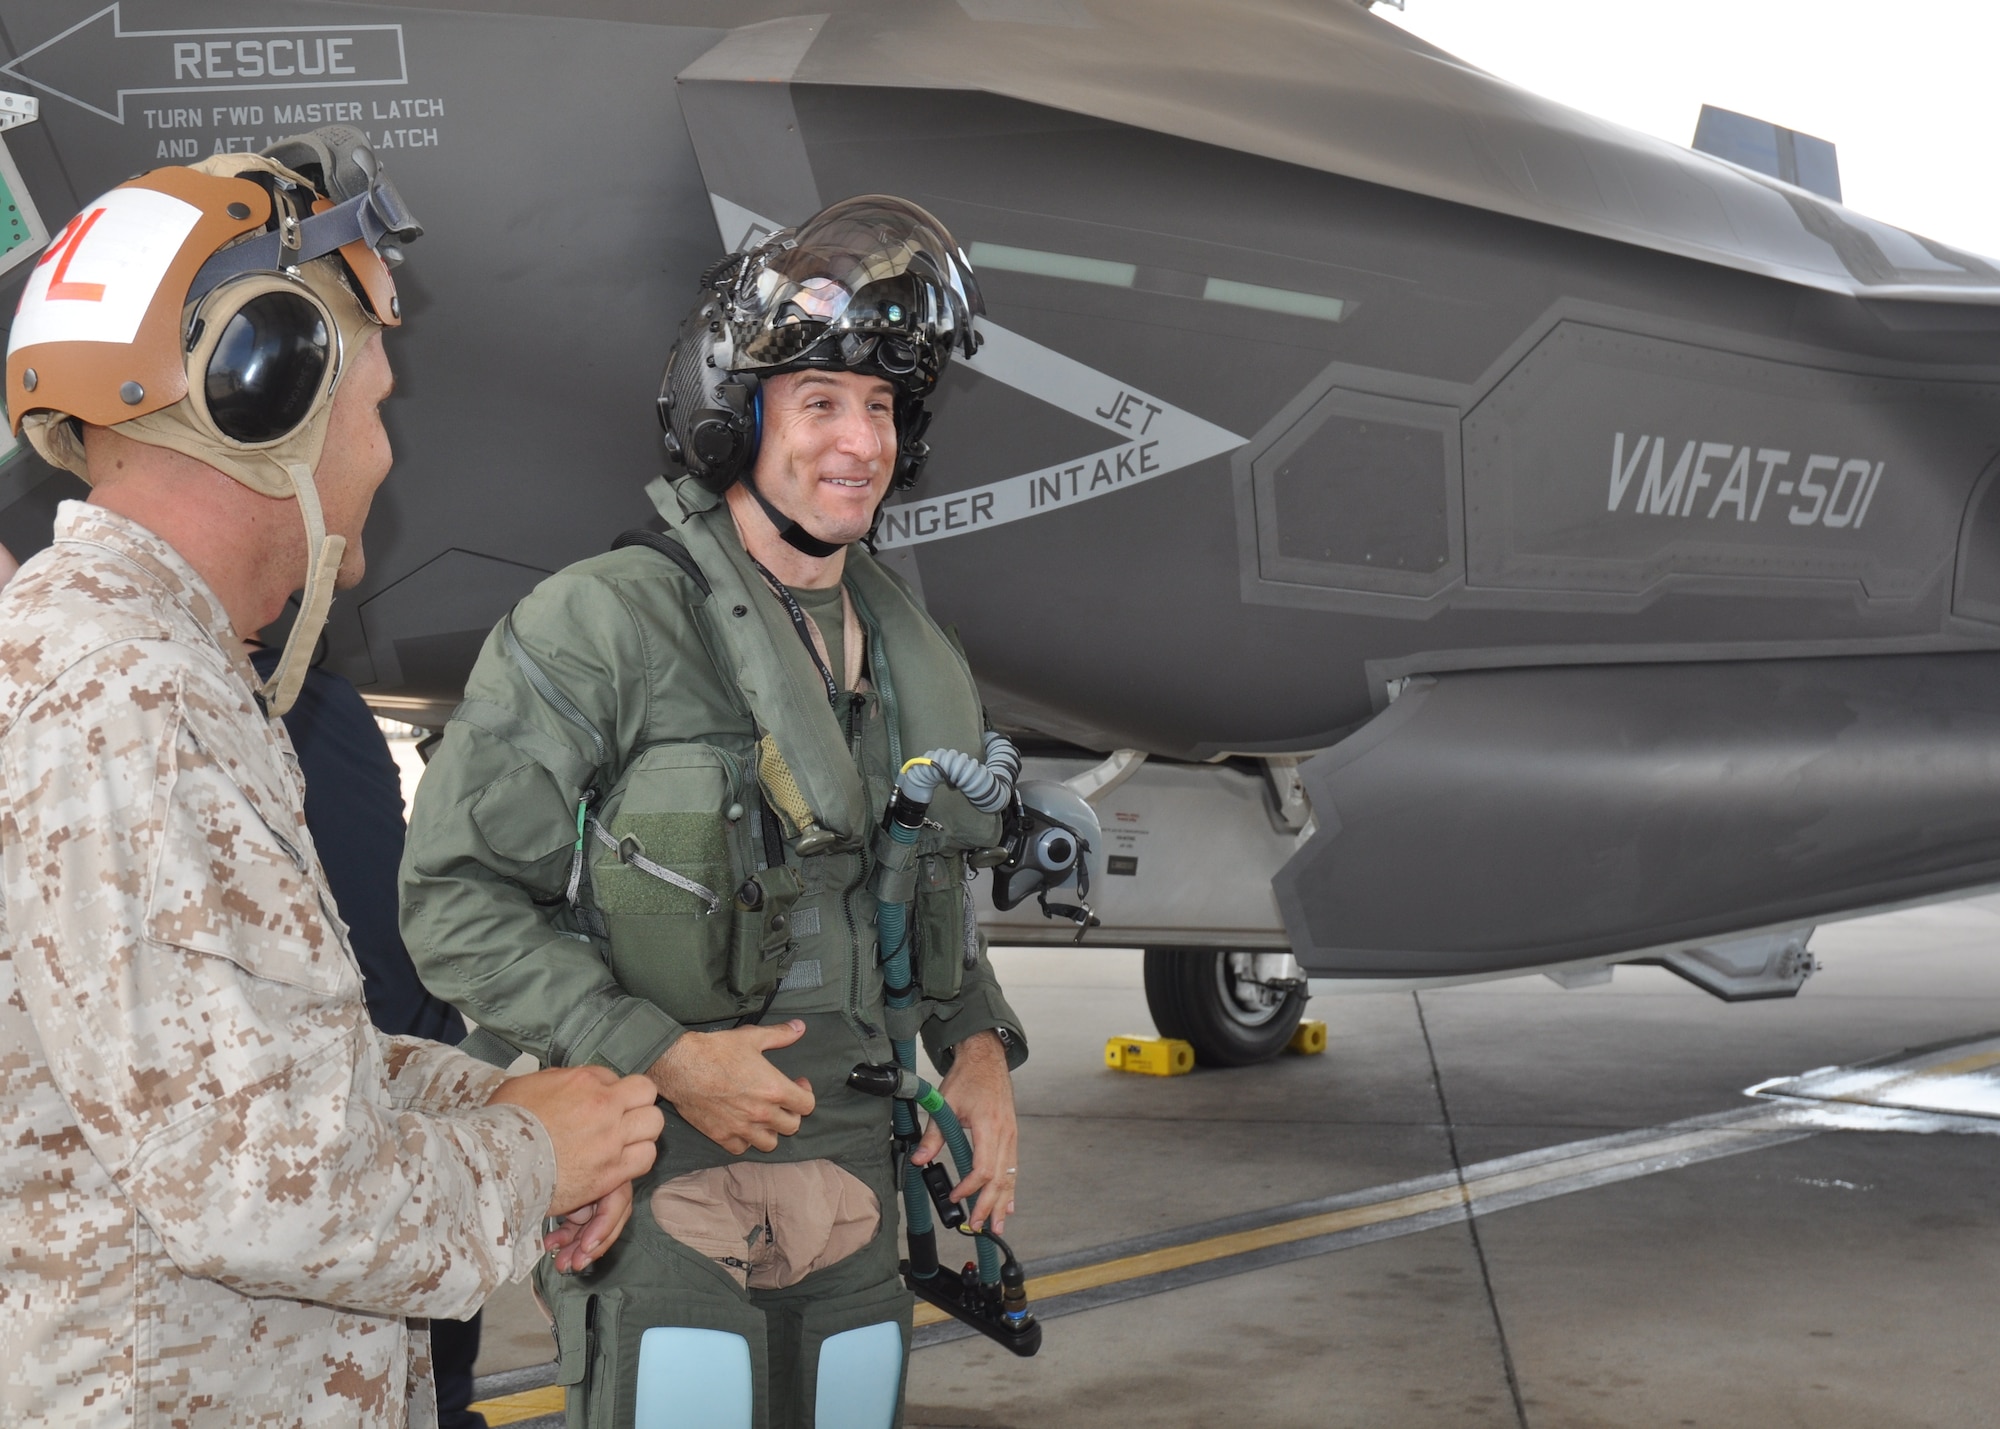 Marine Lt. Col. David Berke, commanding officer for the Marine Fighter Attack Training Squadron 501 is all smiles after he flew the 100th F-35 Lightning II sortie at the 33rd Fighter Wing, Eglin AFB, Fla. July 11. The 33rd FW’s 100 flights completed include 74 F-35A sorties and 26 F-35B sorties. Current flying operations at the wing consist of Marine and Air Force fighter pilots checking out in the F-35 variants for each service.  (U.S. Air Force photo/Maj. Karen Roganov)